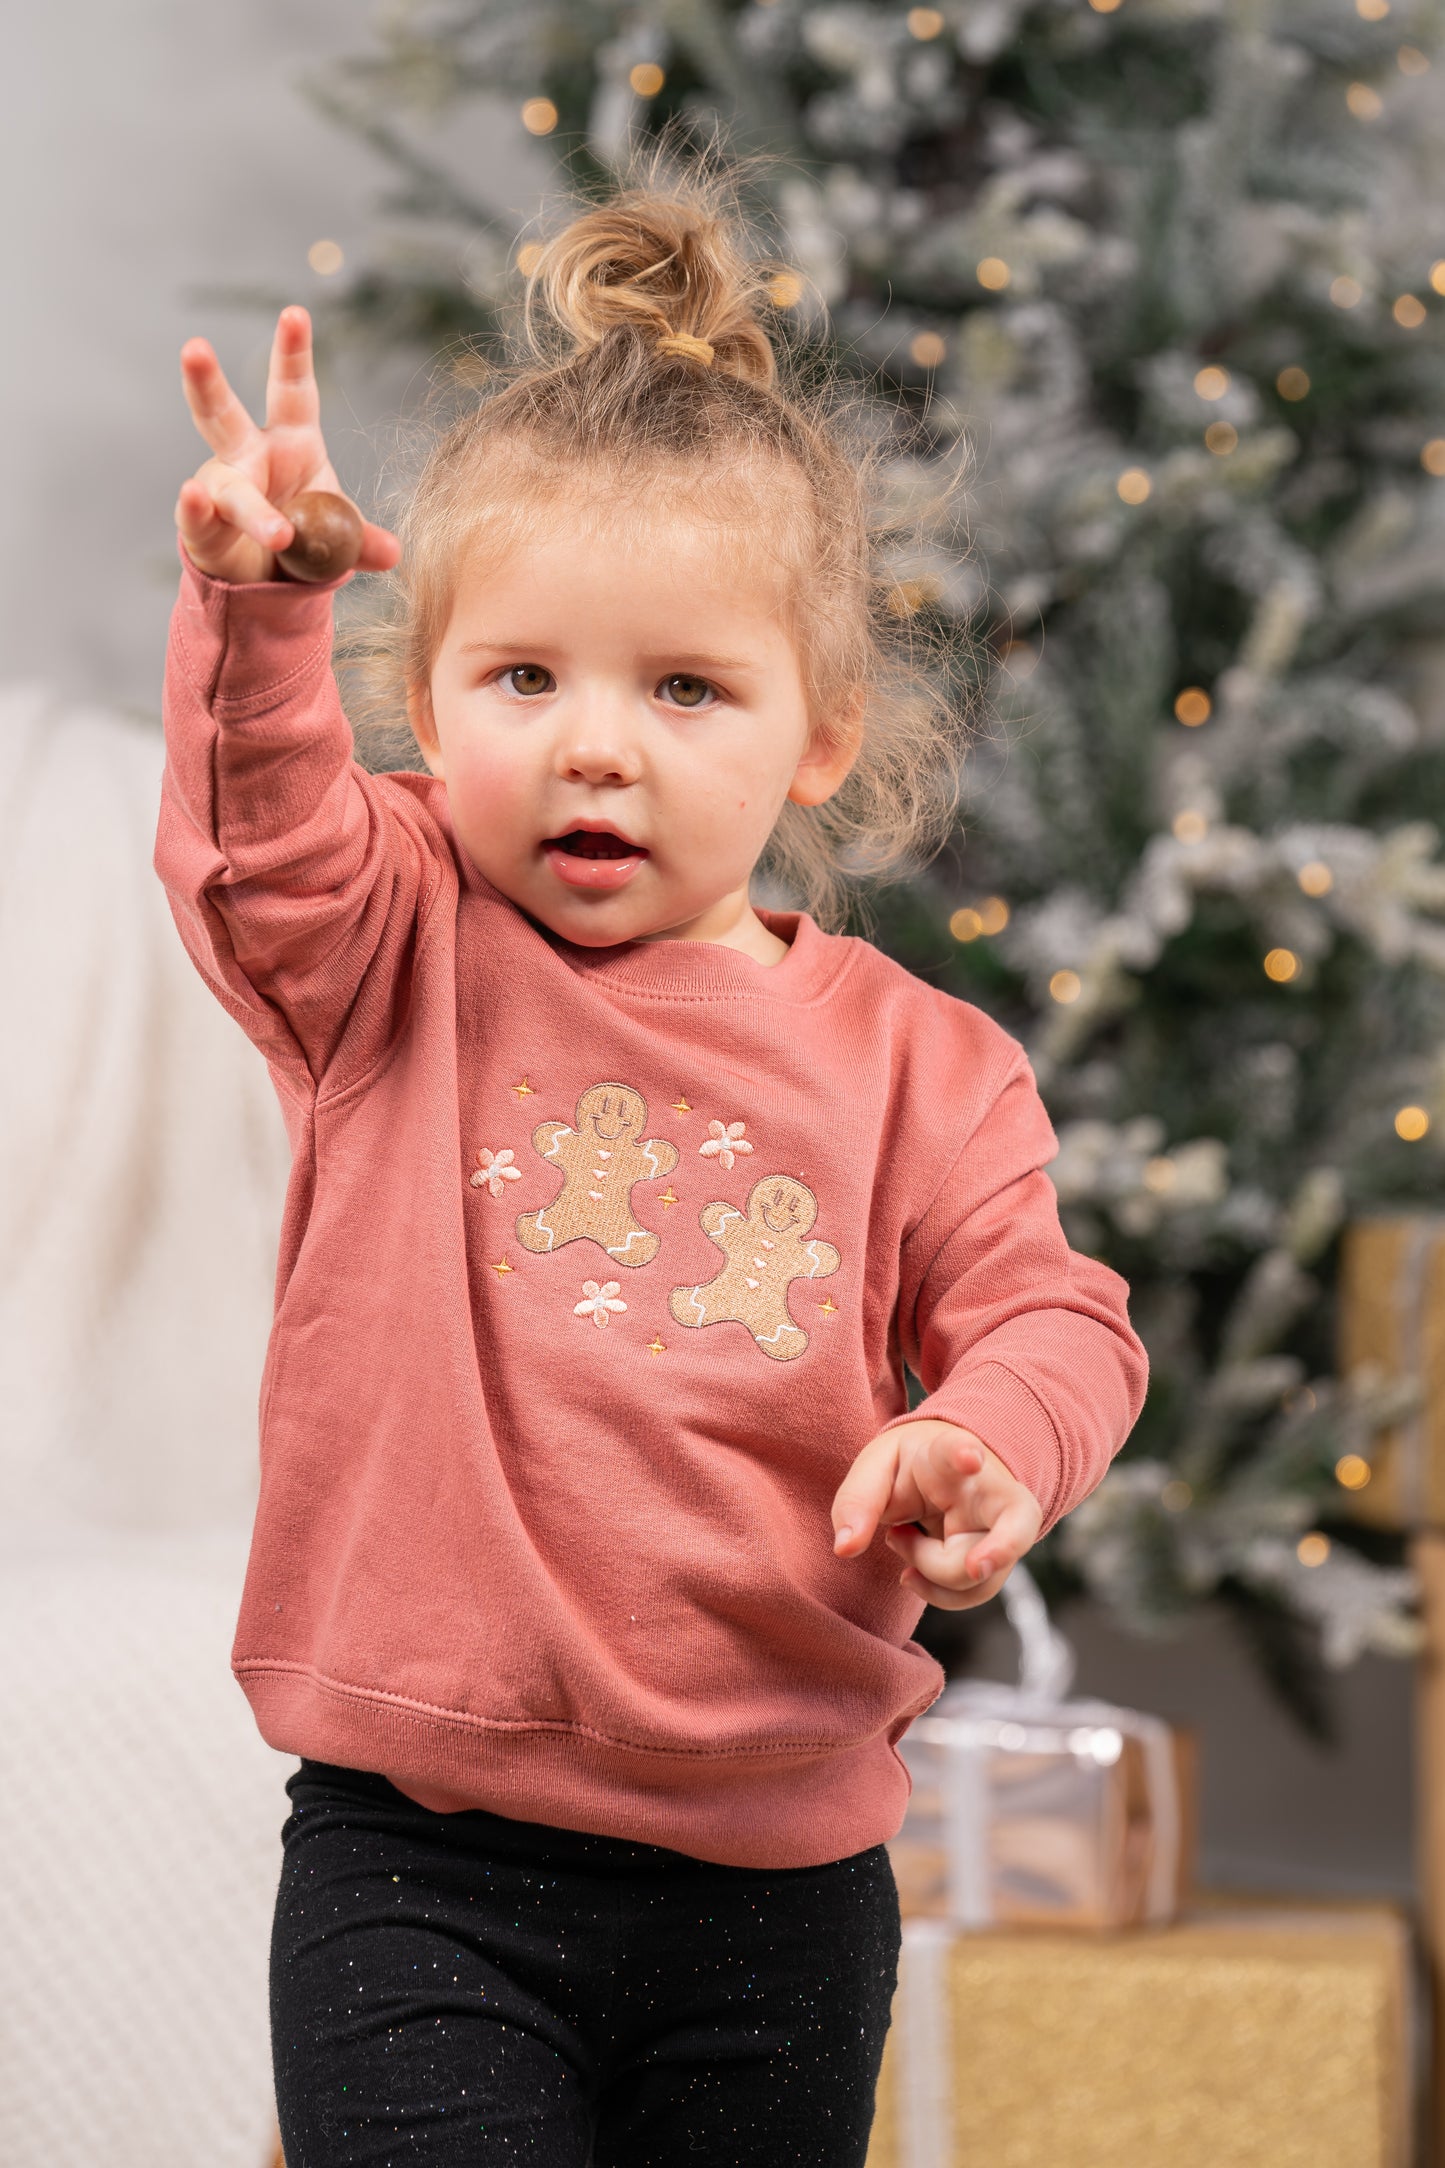 Daisy Gingerbread Cookies - Embroidered Kids Sweatshirt (Mauve)